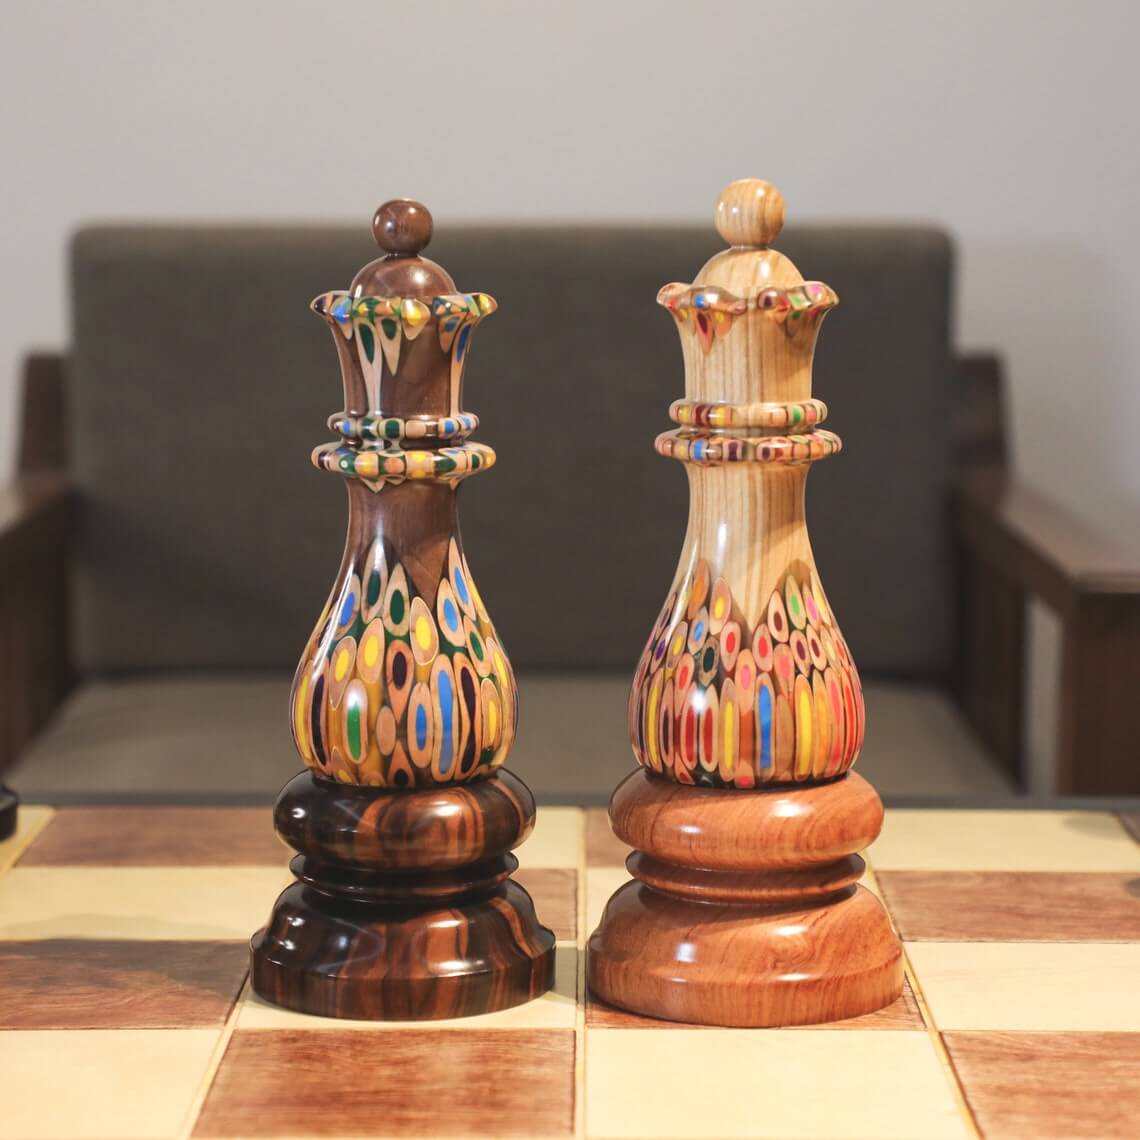 large Queen Chess Piece Decor